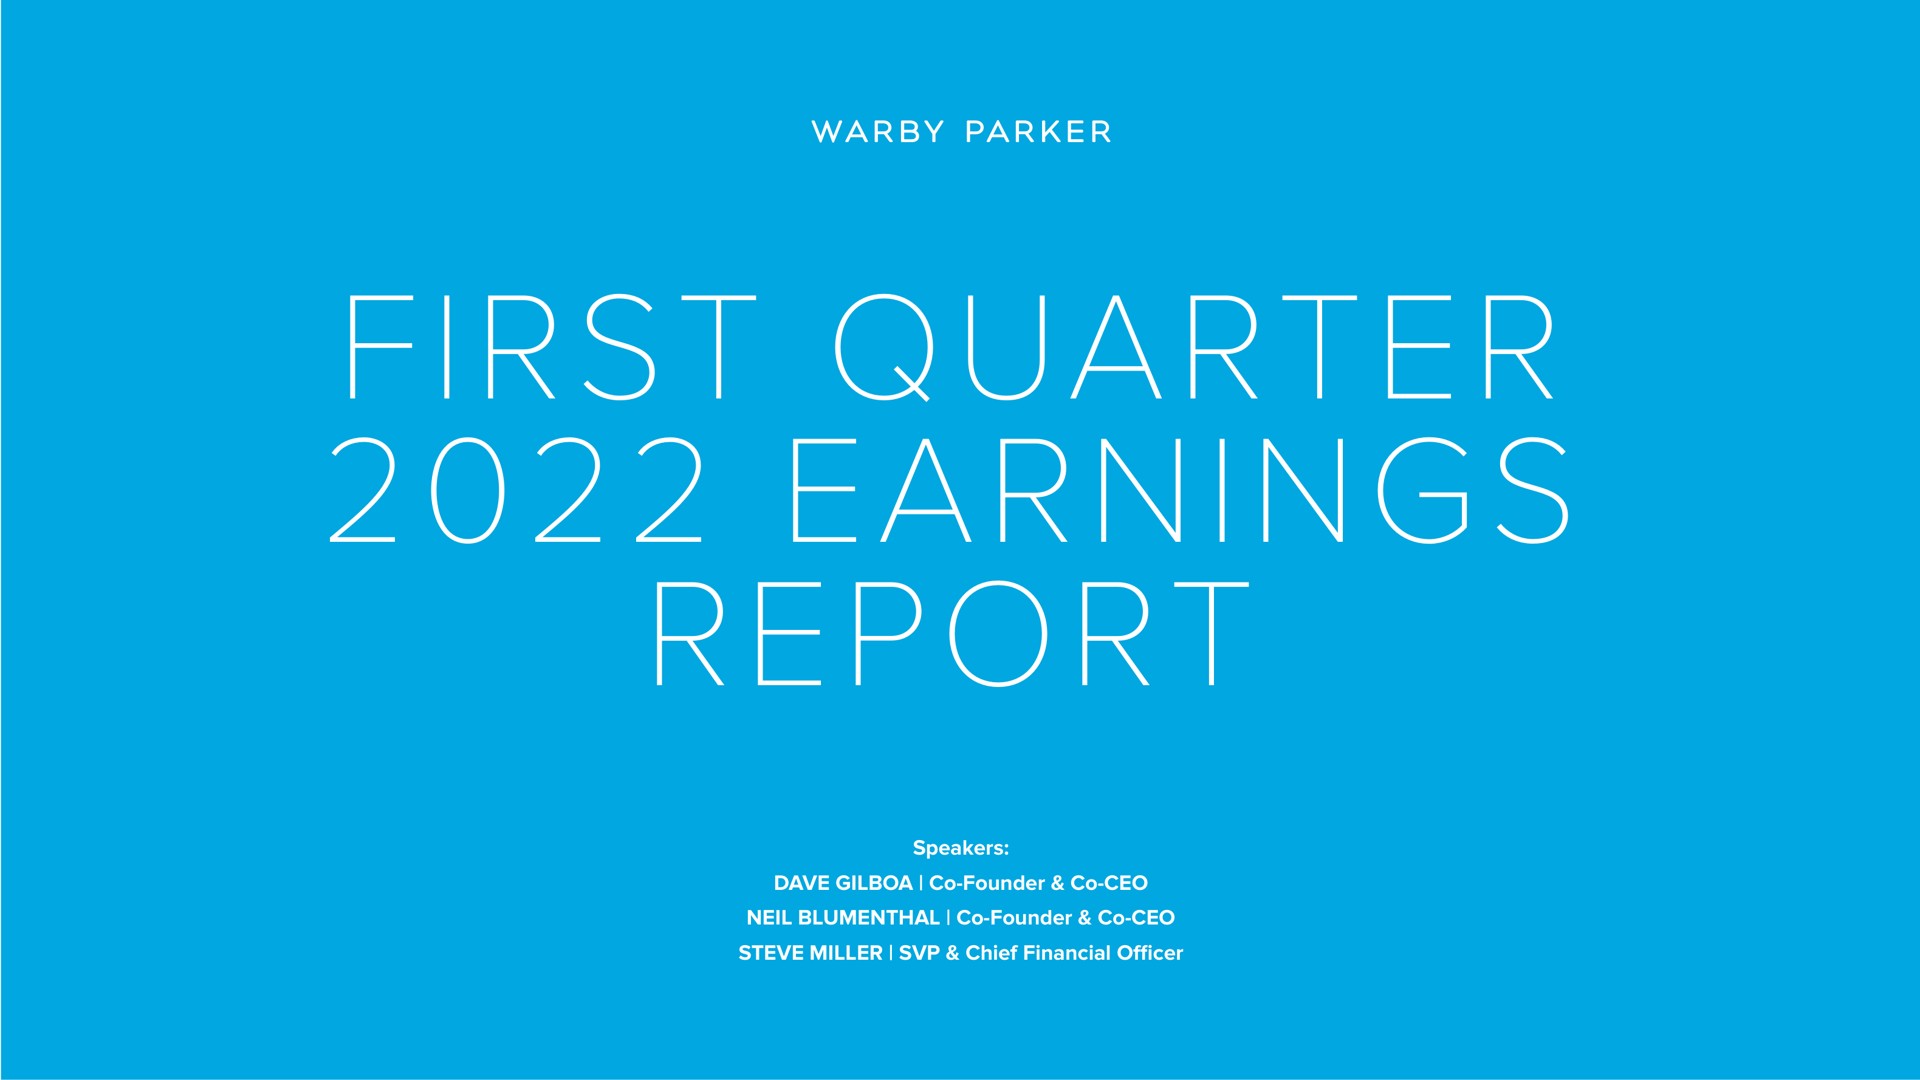 first quarter earnings report parker firs | Warby Parker